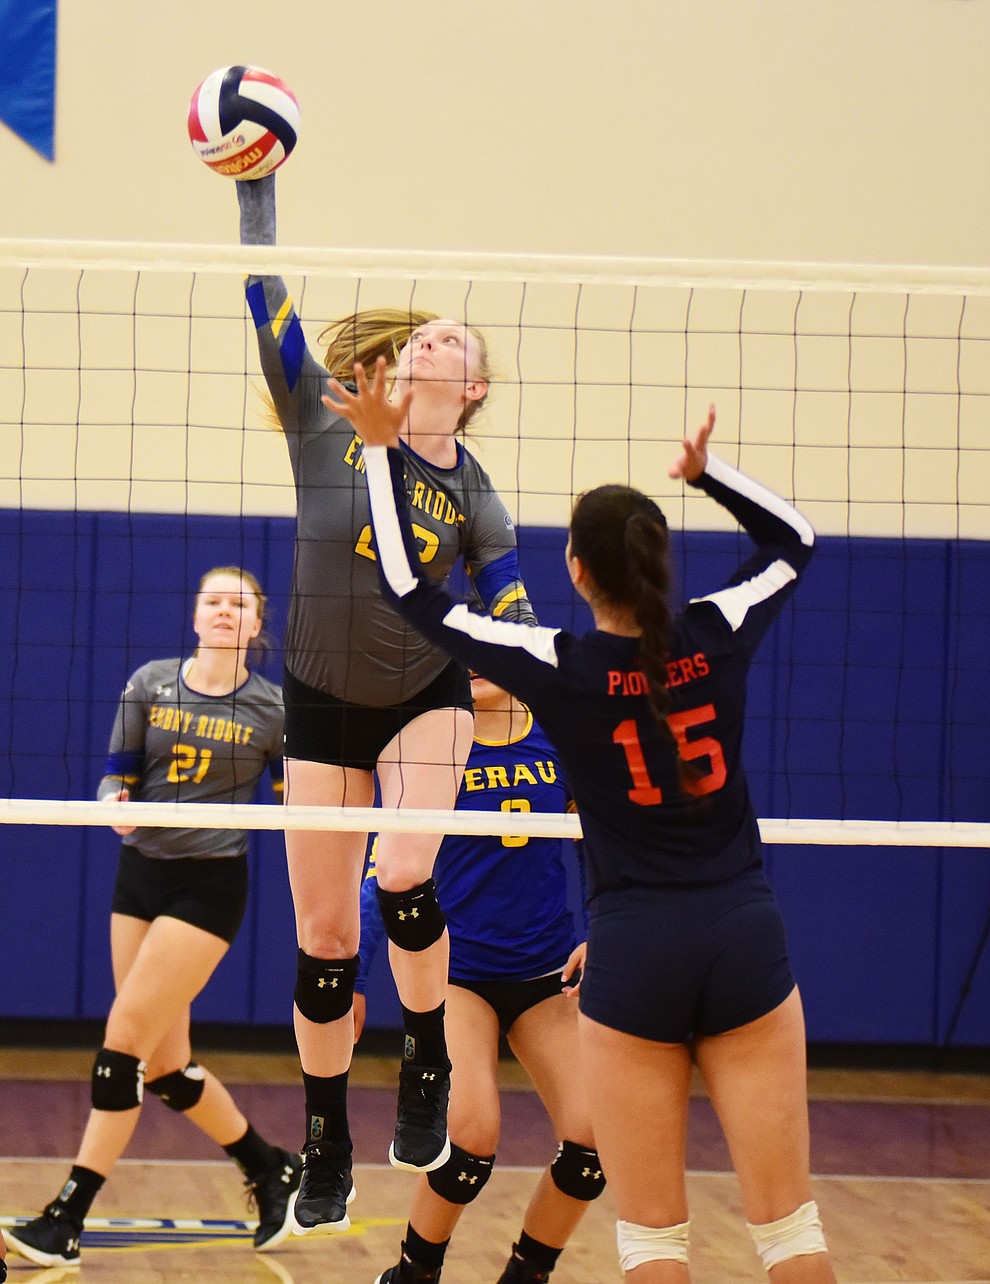 Embry Riddle's Lyndsey Weiler is at the net for a kill as the Eagles take on the University of Antelope Valley Pioneers  in a Cal Pac matchup Saturday, Sept. 29, 2018 in Prescott. (Les Stukenberg/Courier)